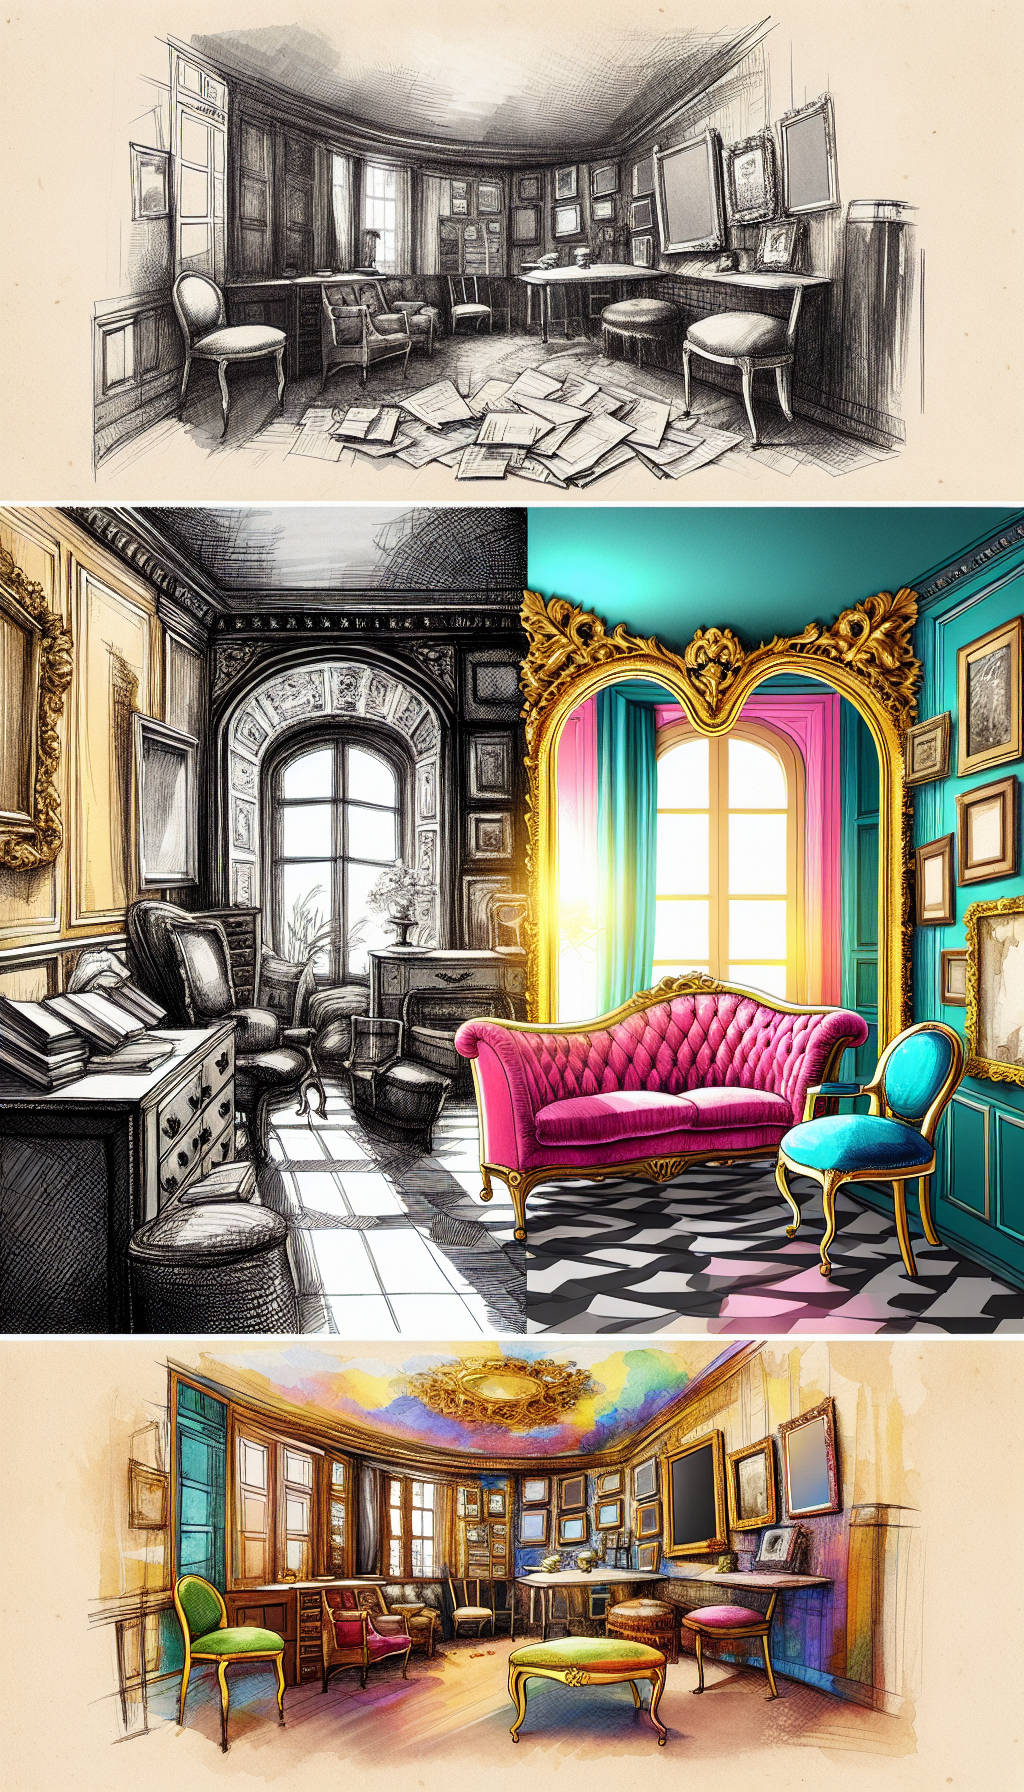 An illustration split down the middle: on one side, a grayscale, detailed sketch of a drab, outdated room; on the other, the same space transformed in vibrant watercolors showcasing modern furnishings accented with antique frames and vintage decor. The juxtaposition highlights the value of blending historic charm with contemporary design, each side connected by a gilded mirror reflecting both eras.